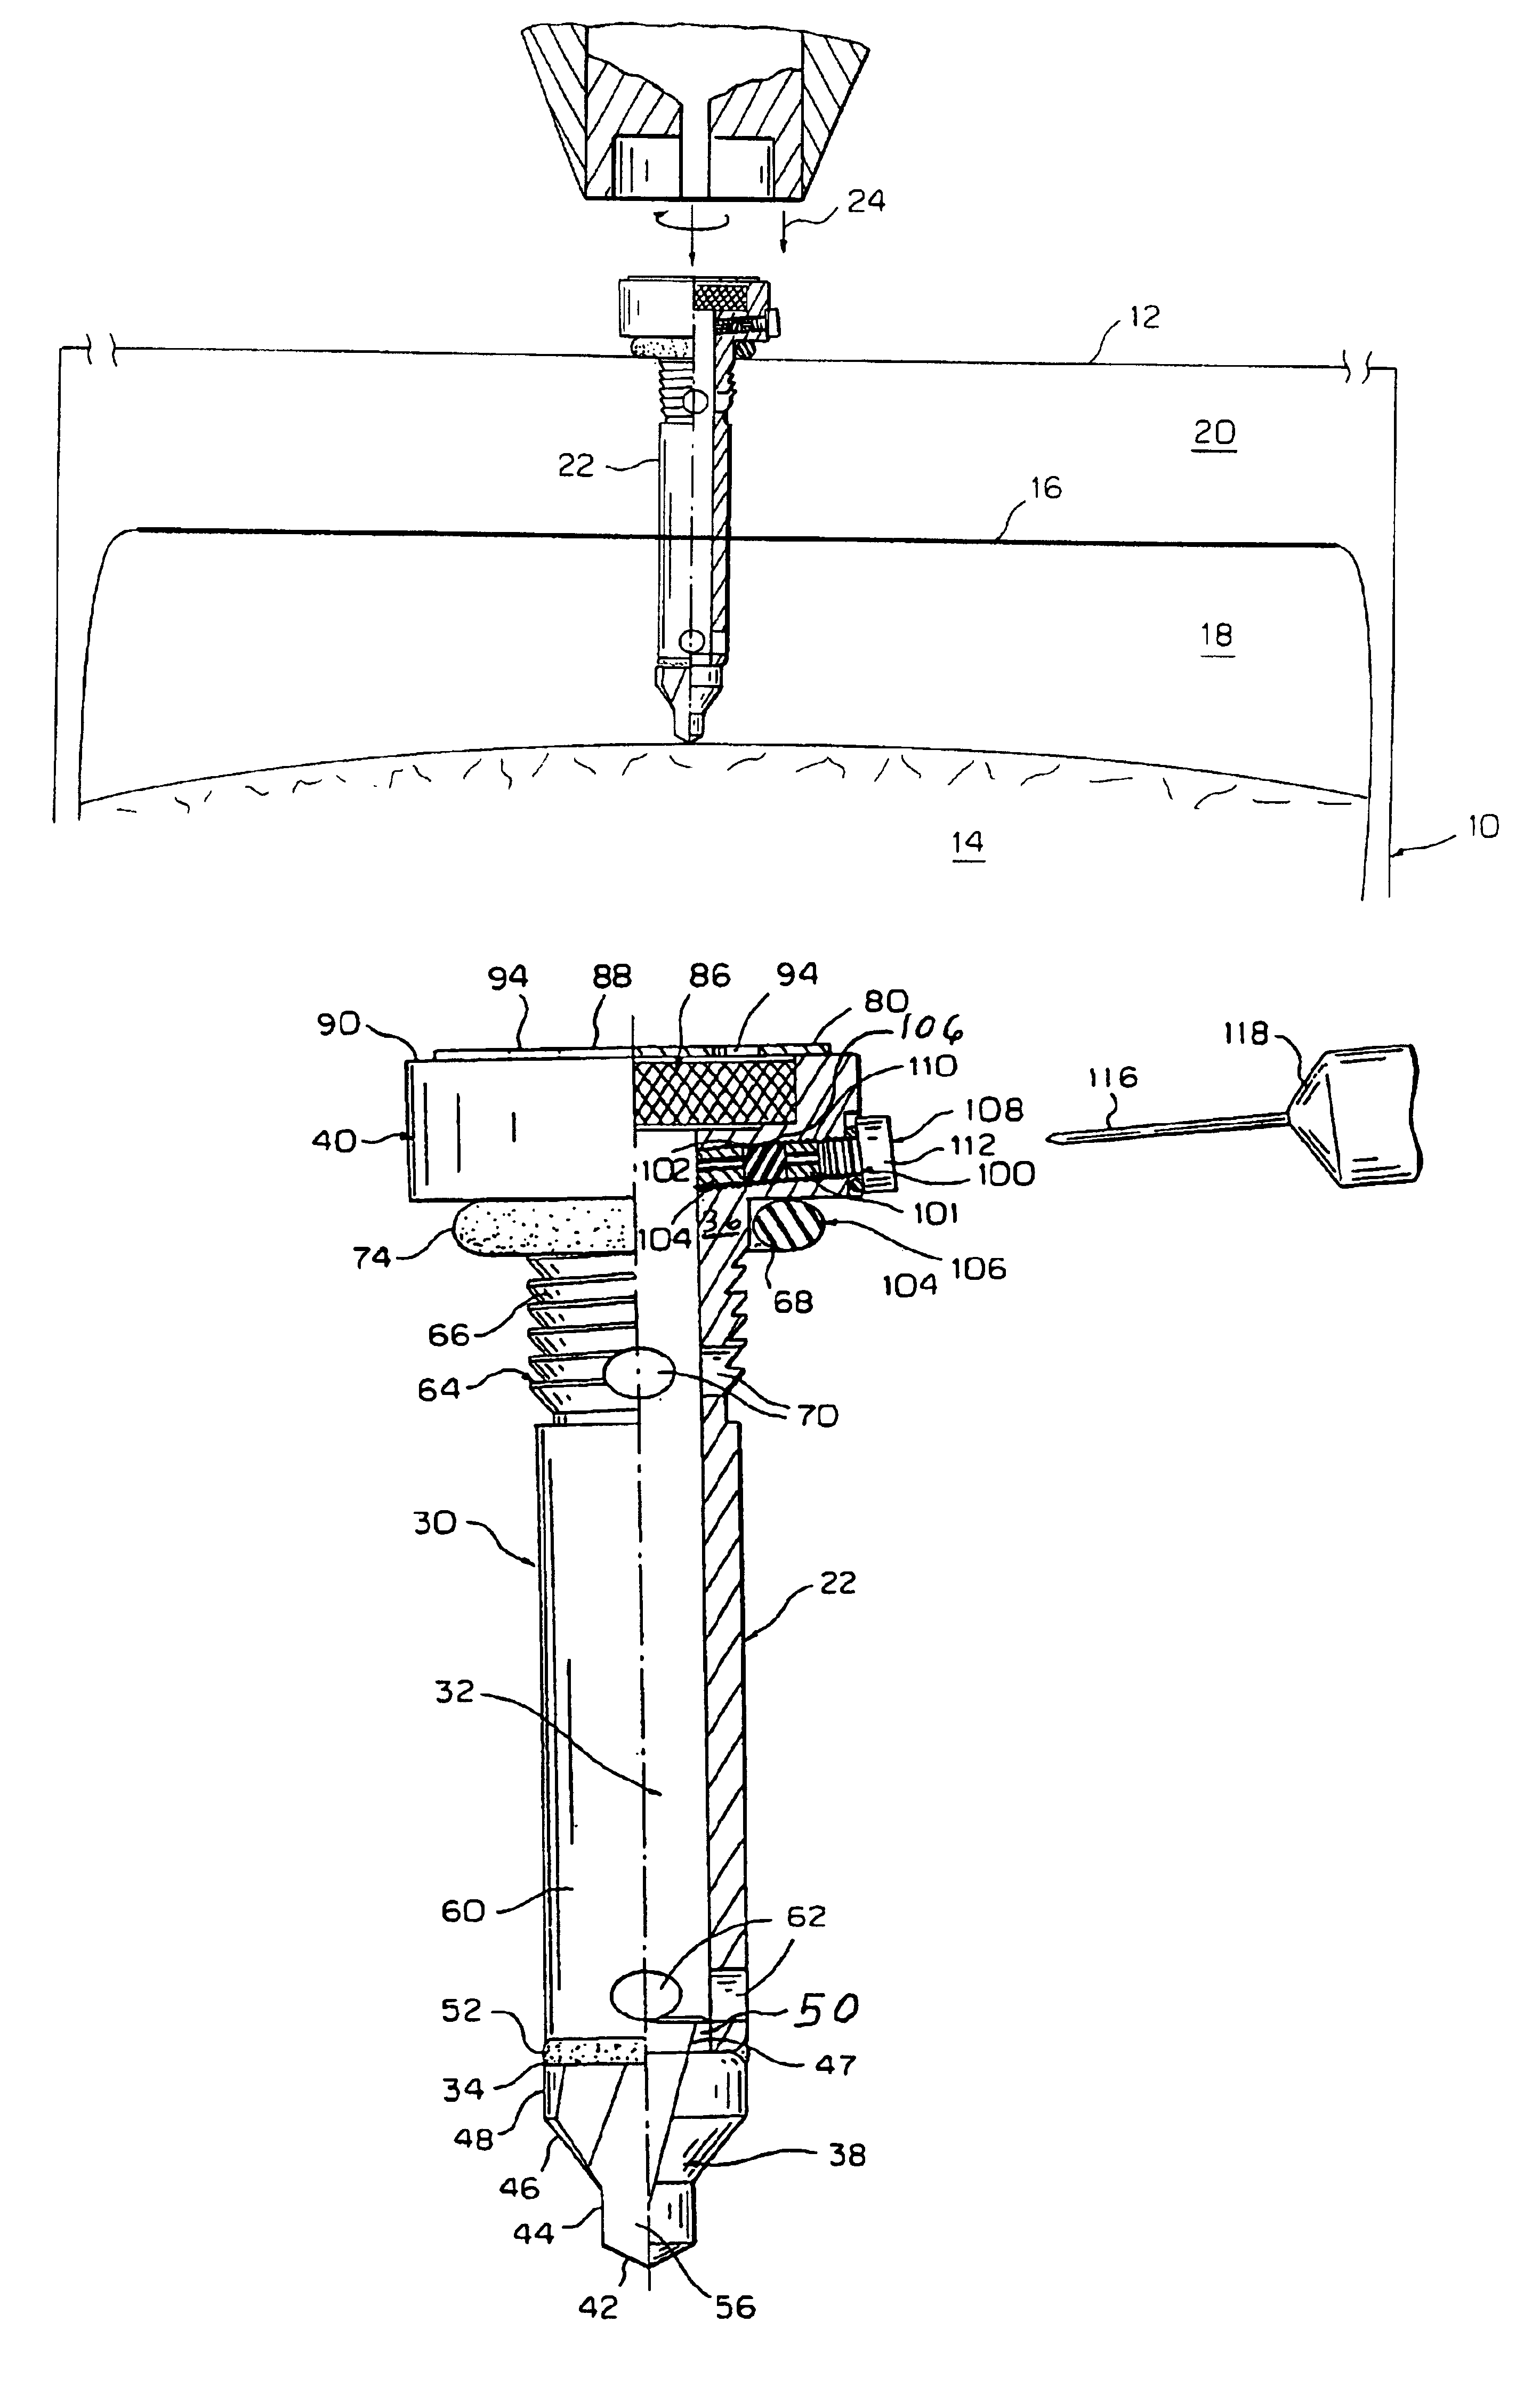 Probe with integral vent, sampling port and filter element